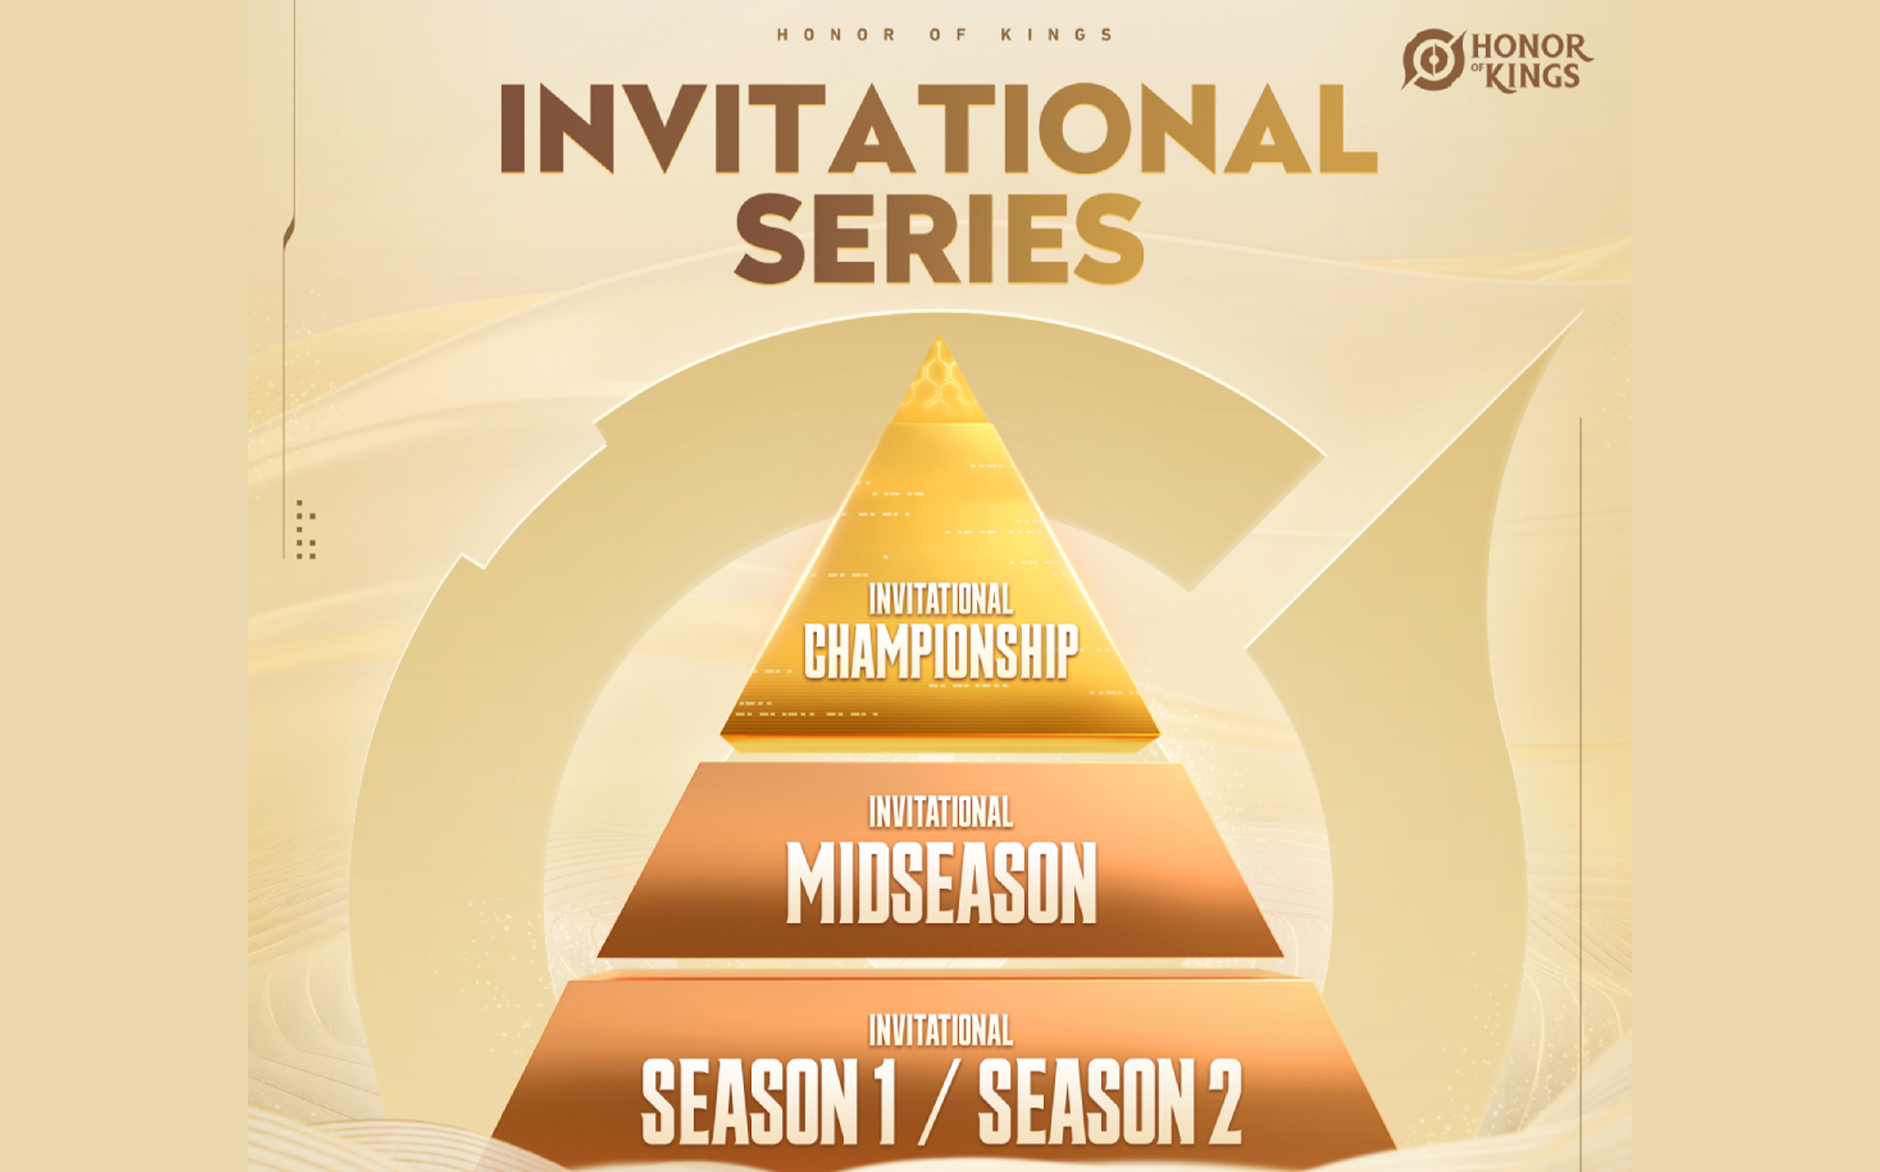 Honor of Kings announces details about upcoming invitational series